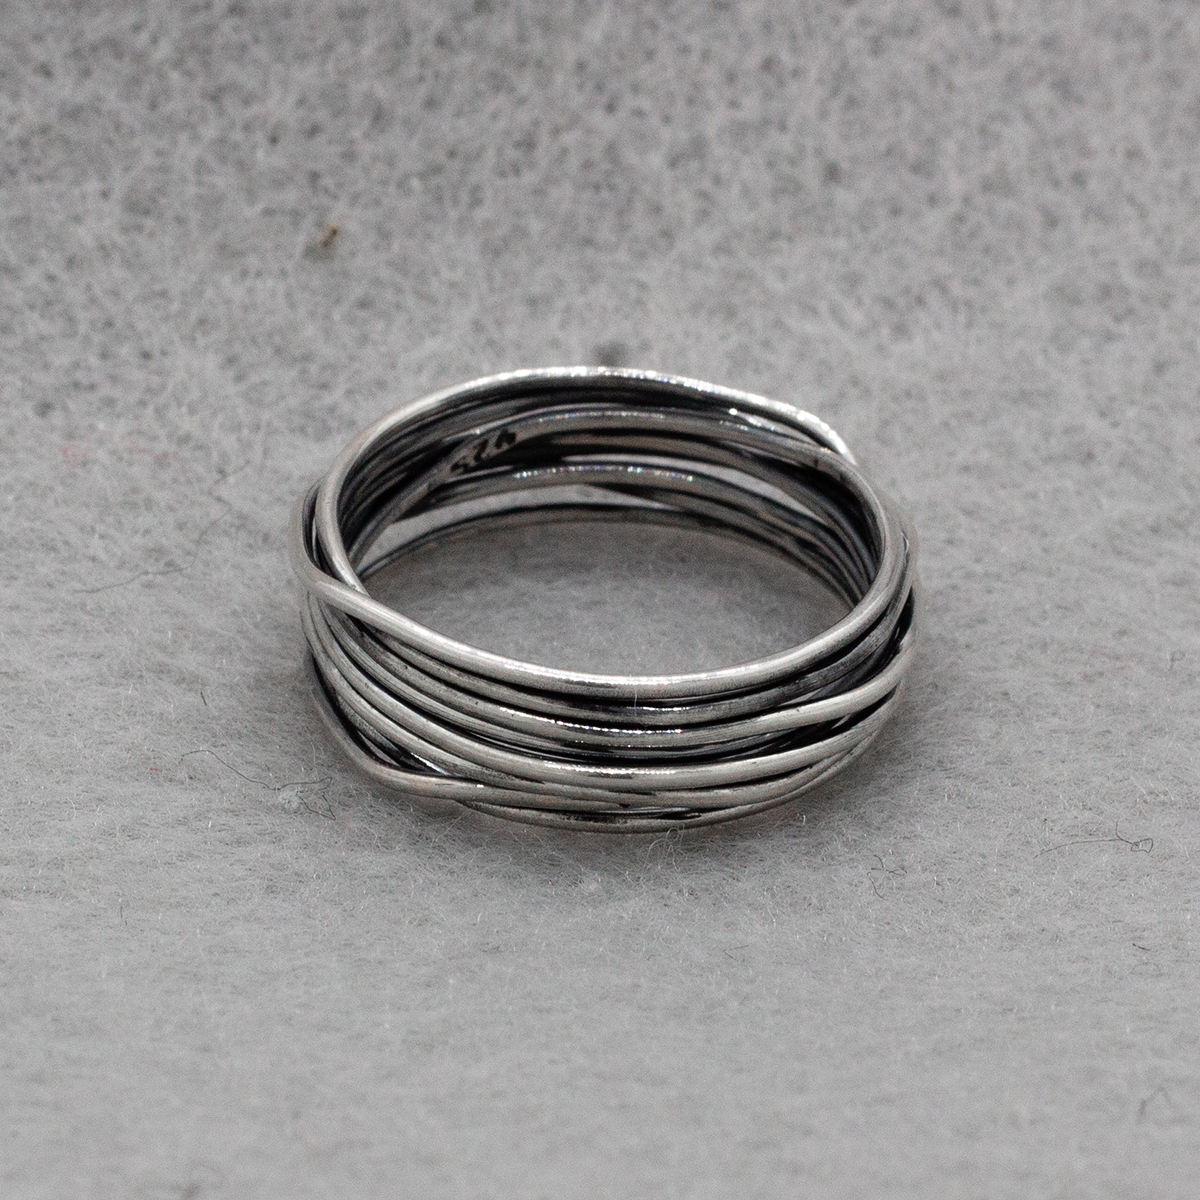 Aran - Lasso S Oxidised Silver Silver Ring Curated and designed by Emilio Sotelo Jewelry for Croi Kinsale Jewellery in Kinsale West Cork Ireland Europe. Find exceptional handmade silver and gold jewellery at affordable prices for birthday gifts and Christmas presents. Handcrafted Silver jewelry. Find the best affordable jewellery - Size 11